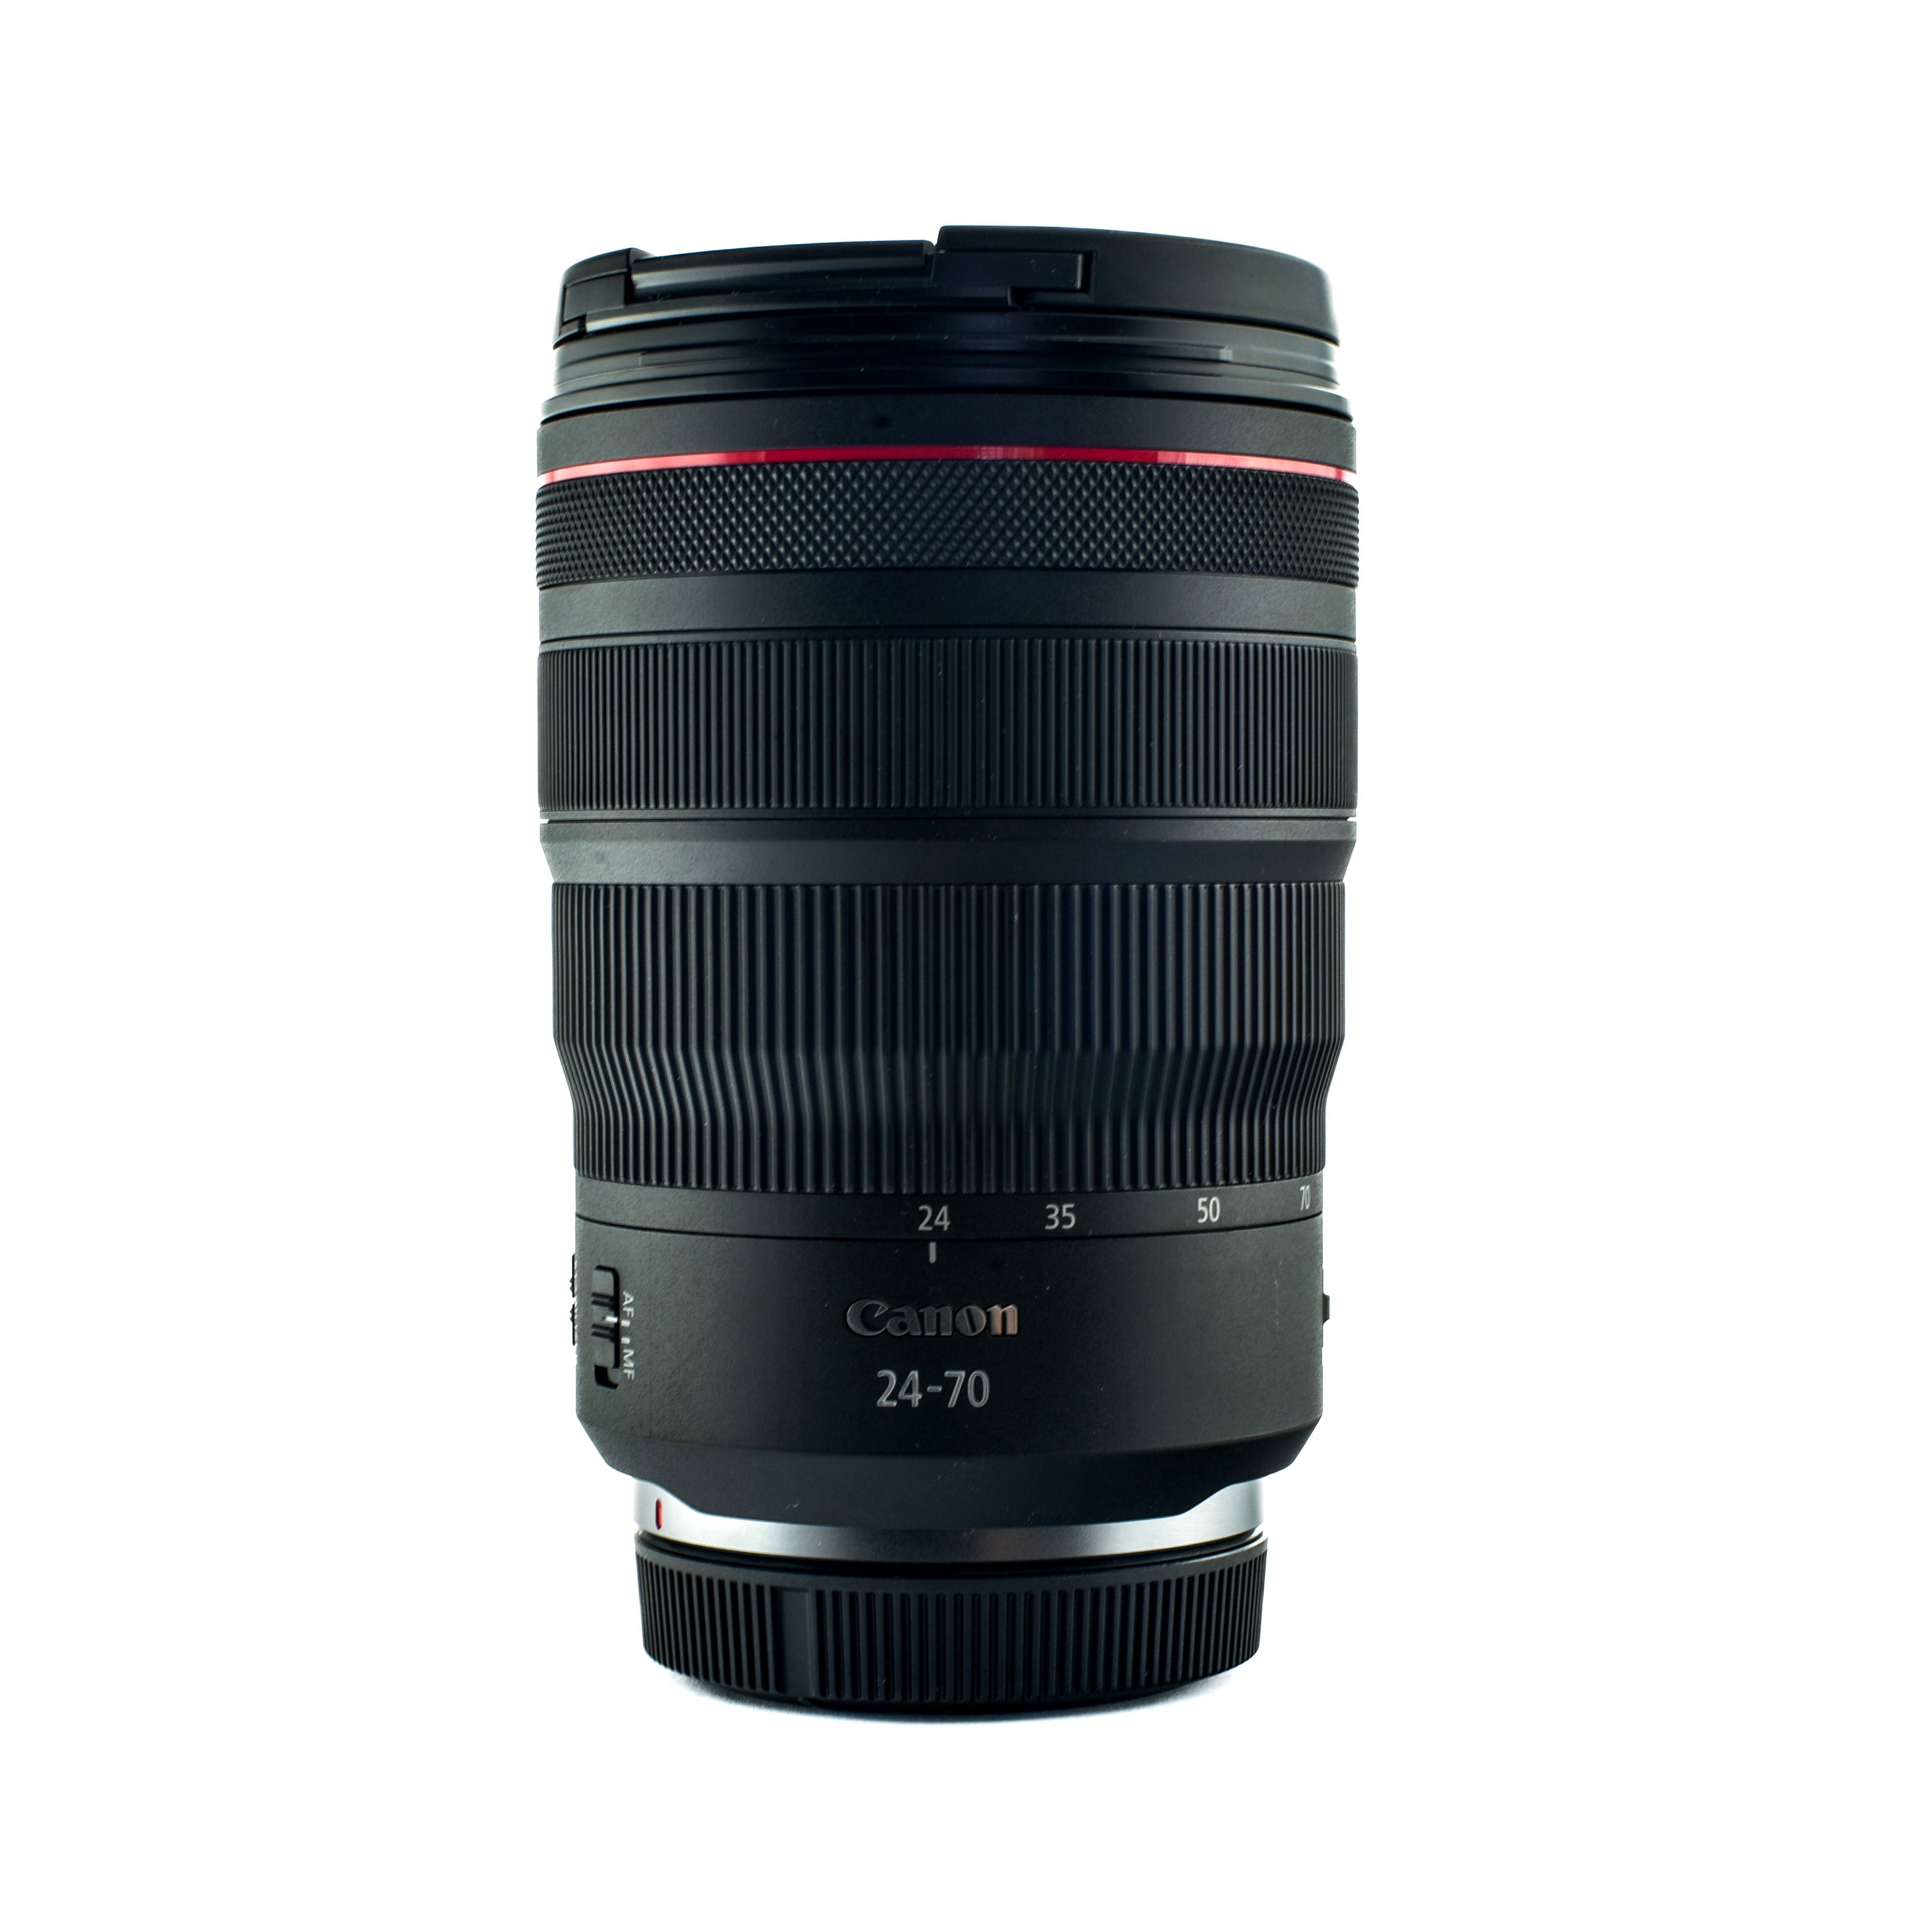 Canon RF 24-70mm f 2.8L IS USM lens